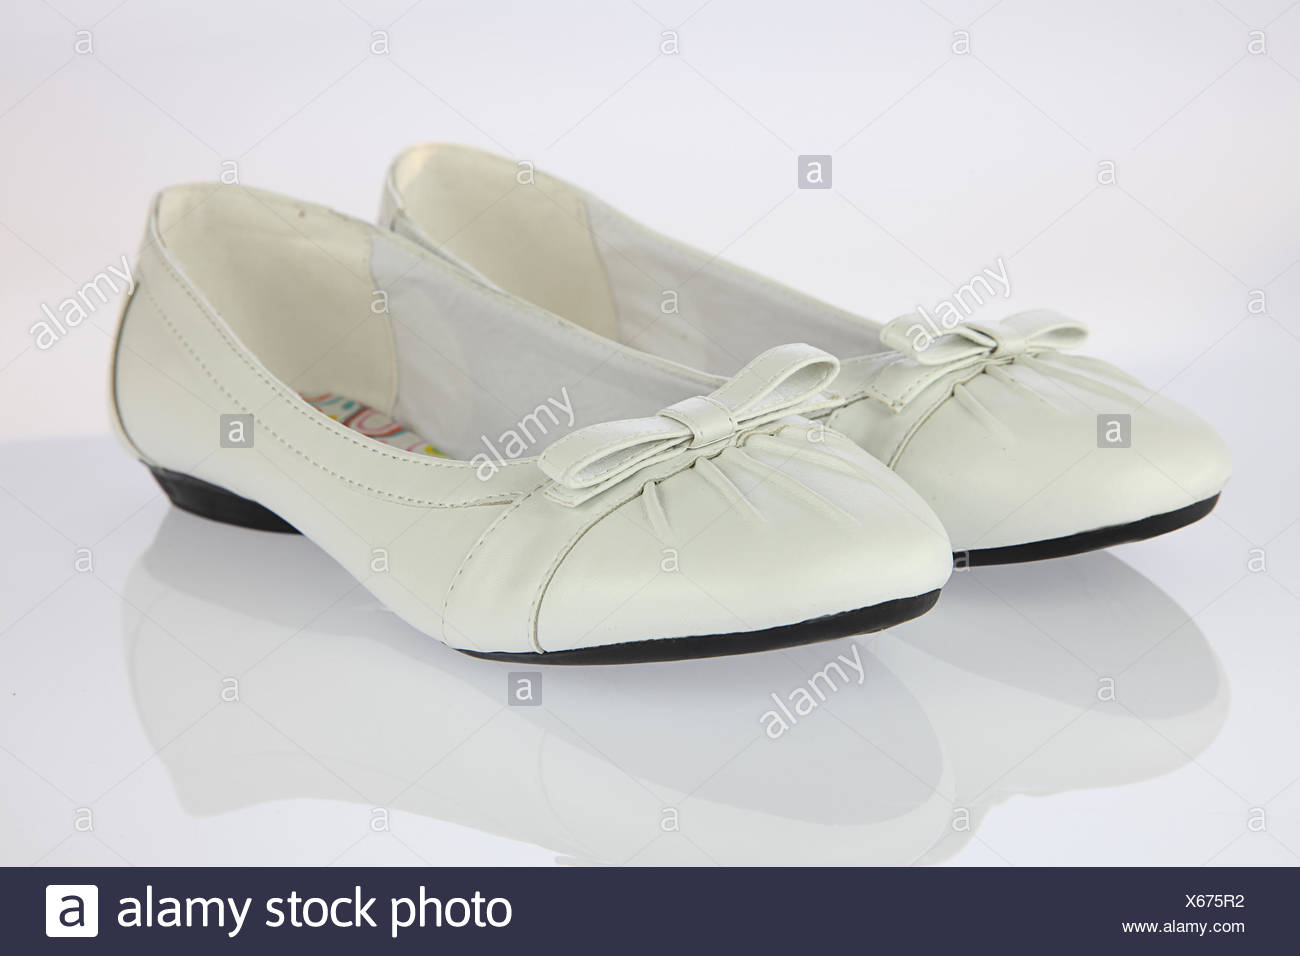 ladies marriage shoes